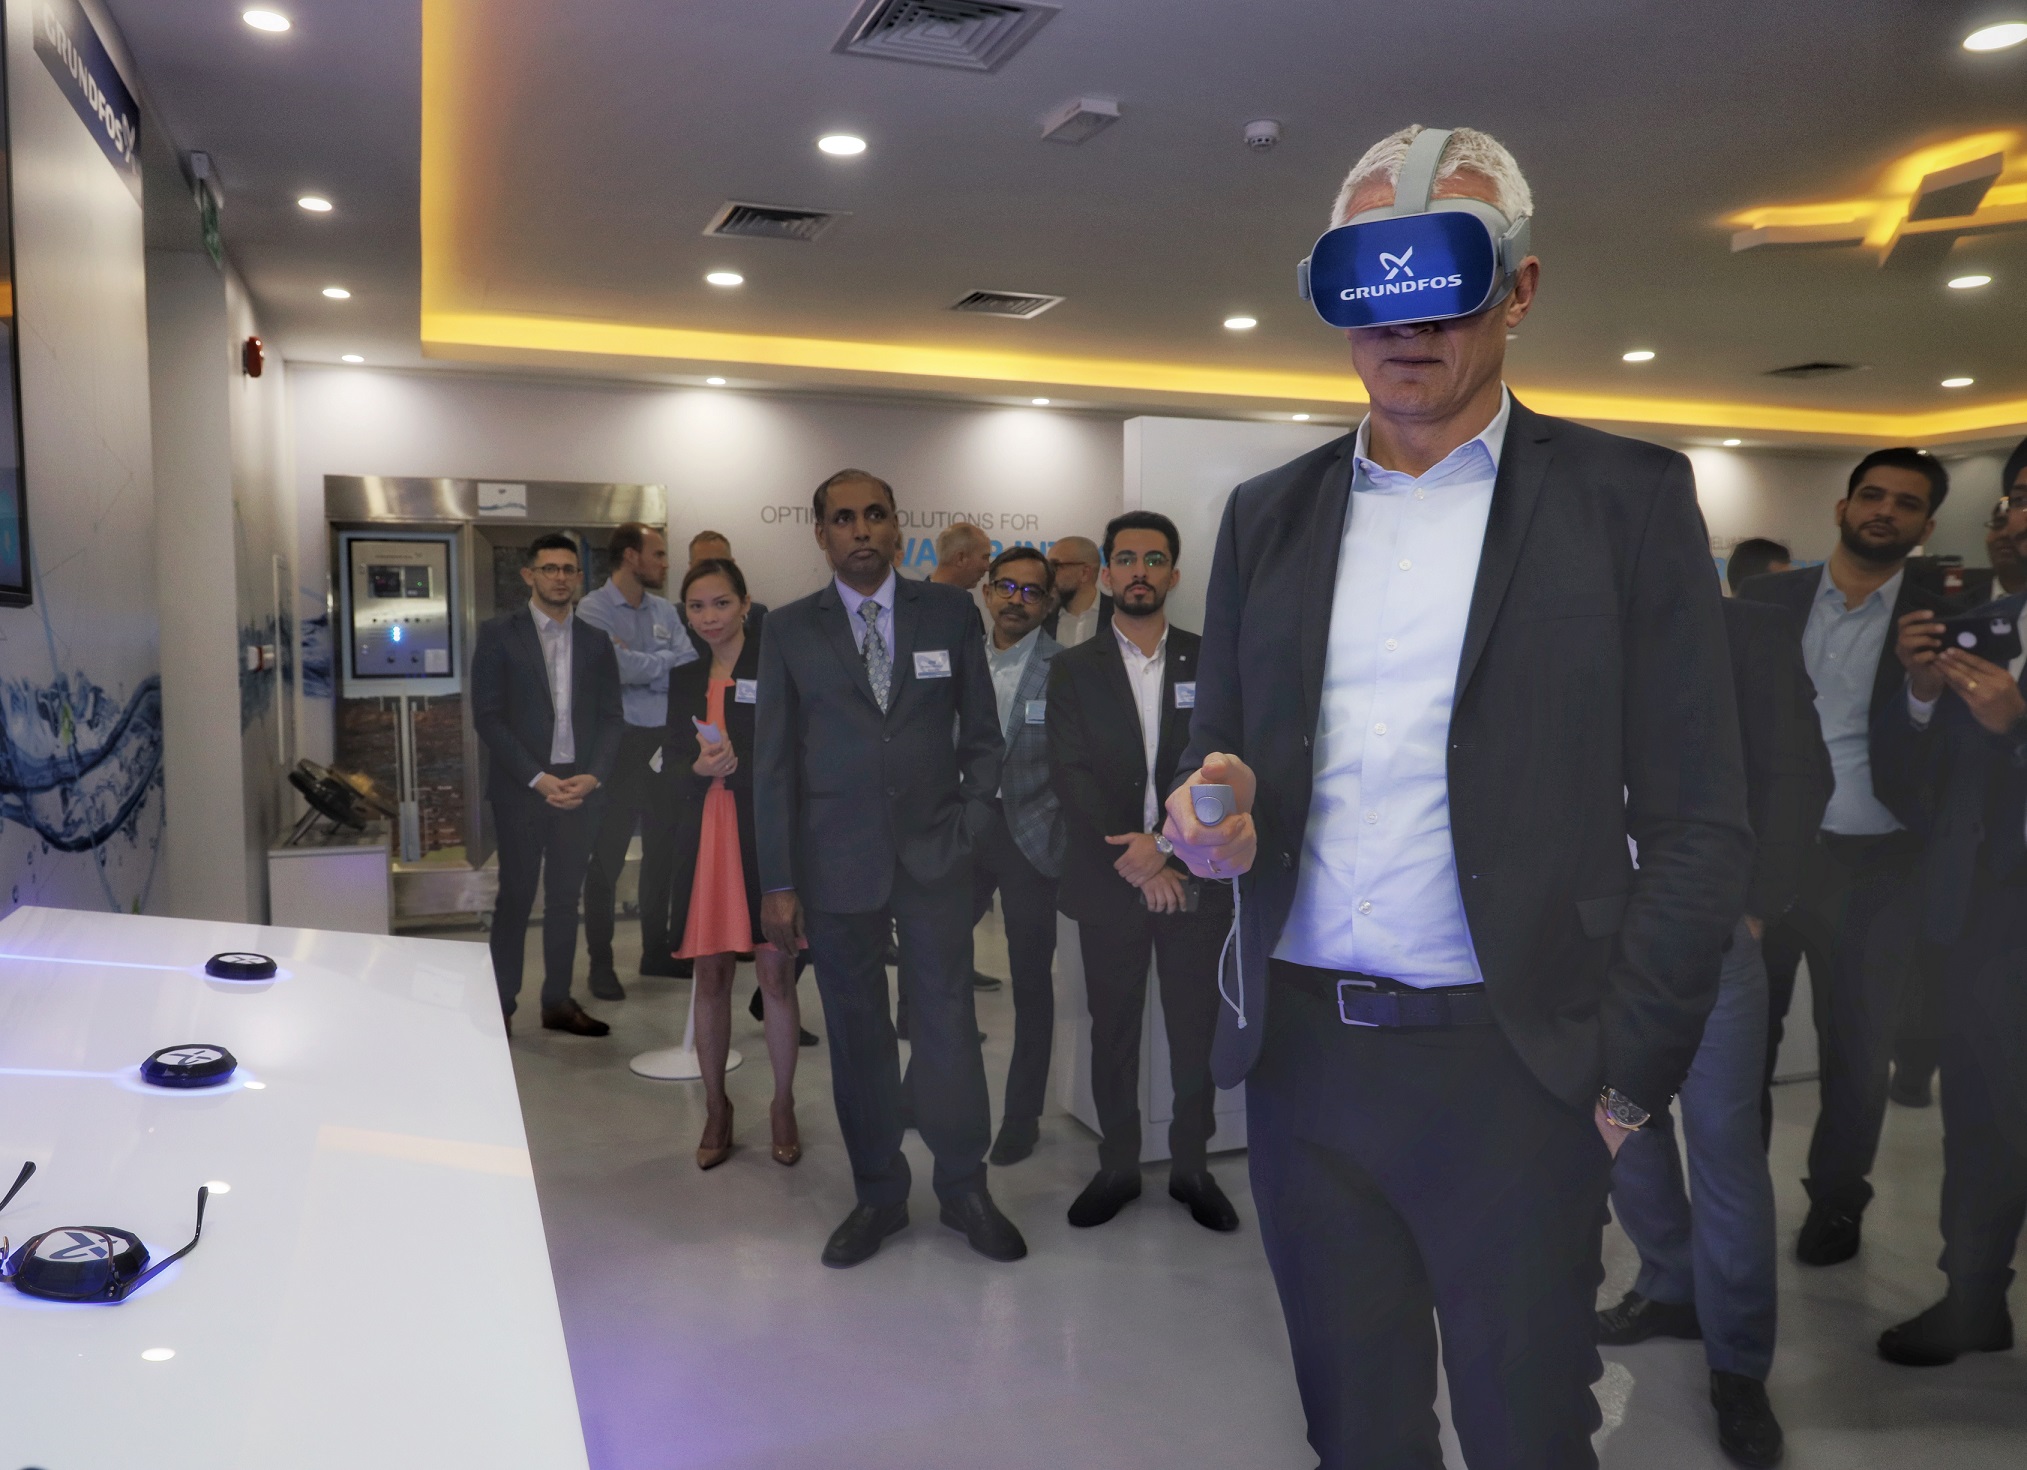 Mads Nipper tests out the technology at the new Grundfos iFoss Lab in Dubai.